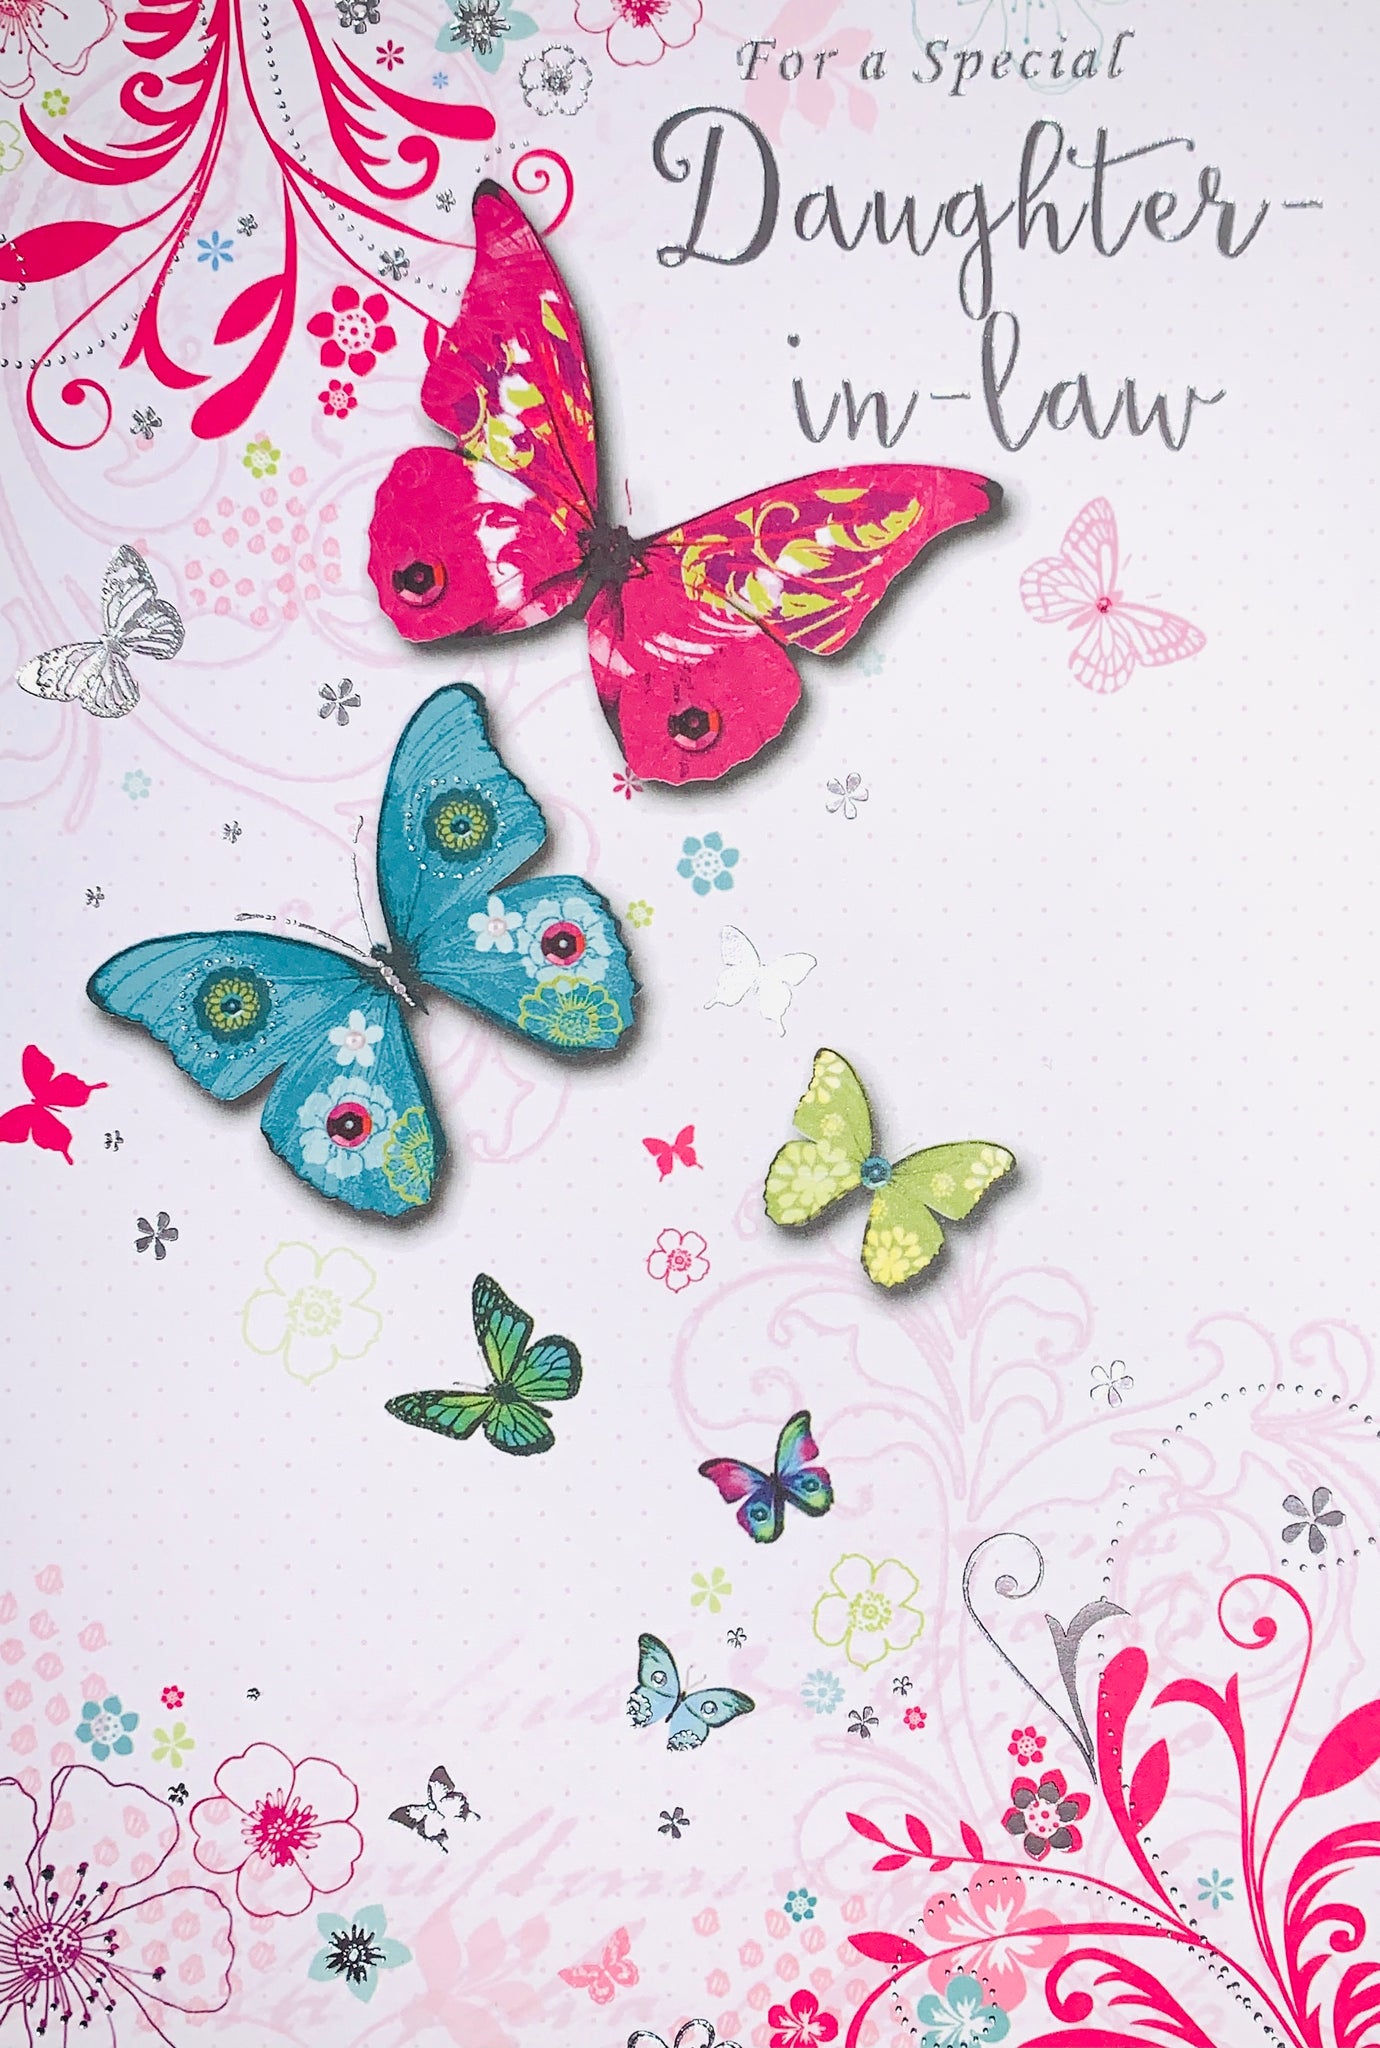 Daughter in law birthday card - butterflies